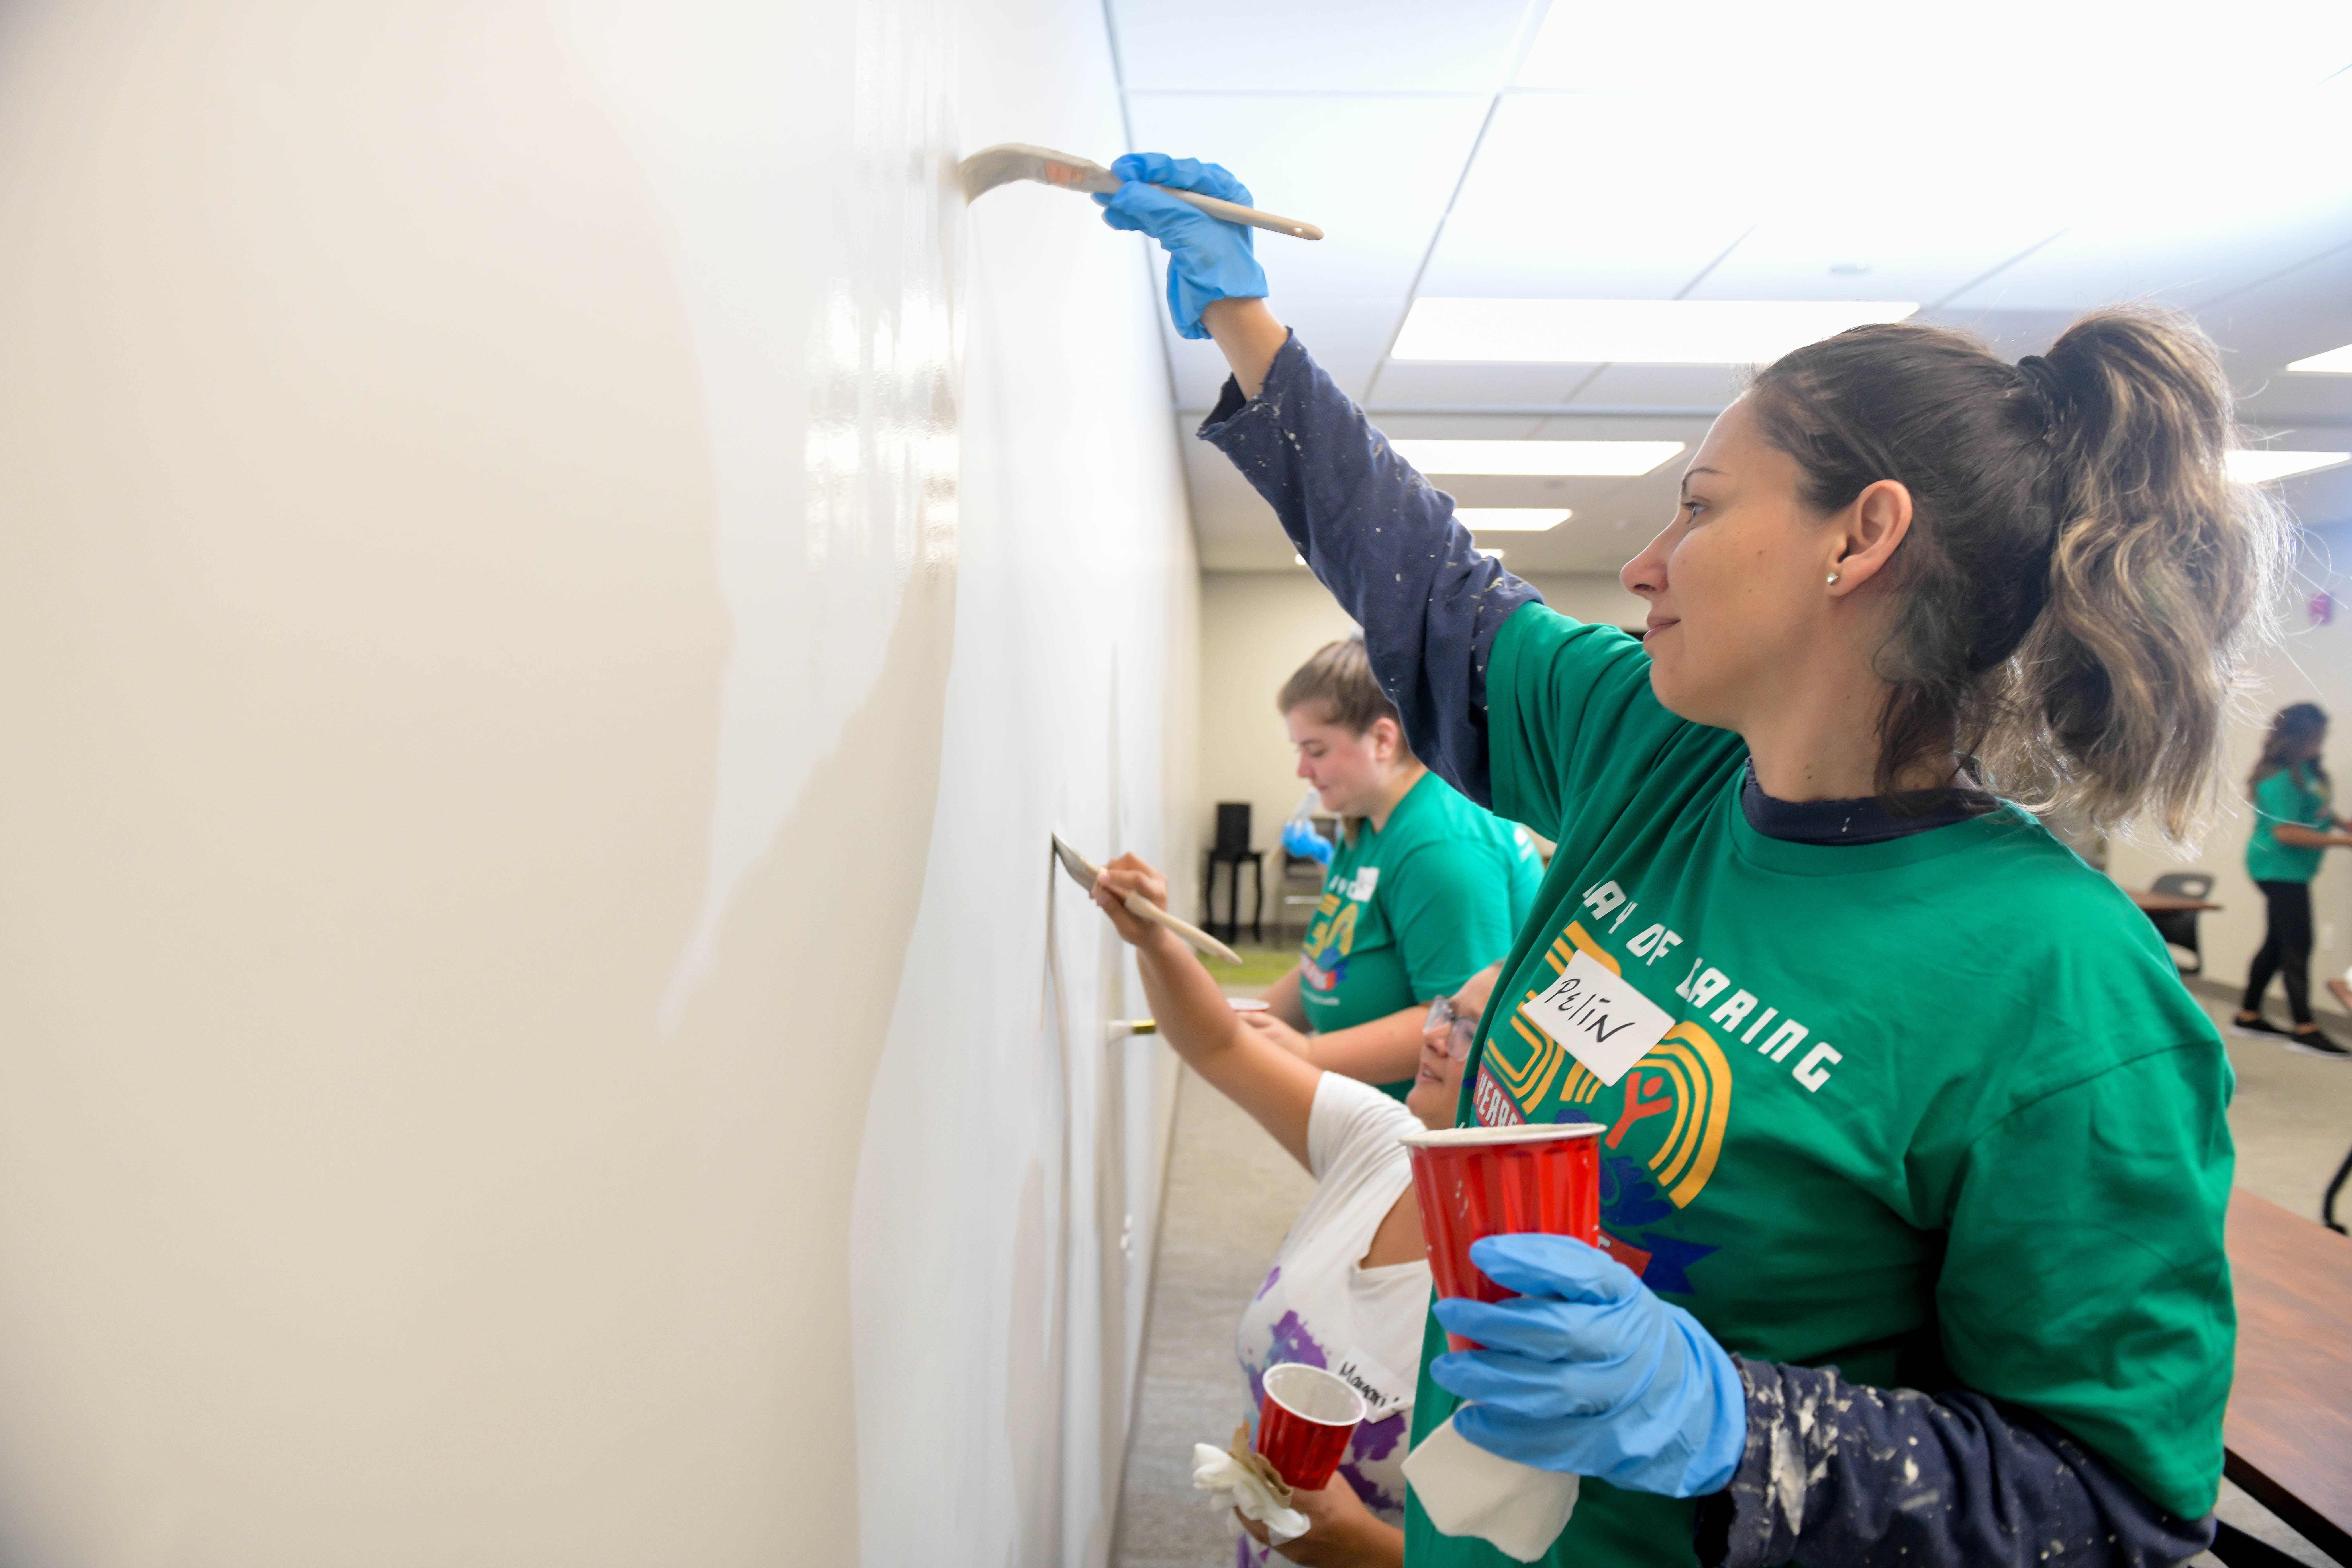 Member of UMass Chan engaging in Day of Caring